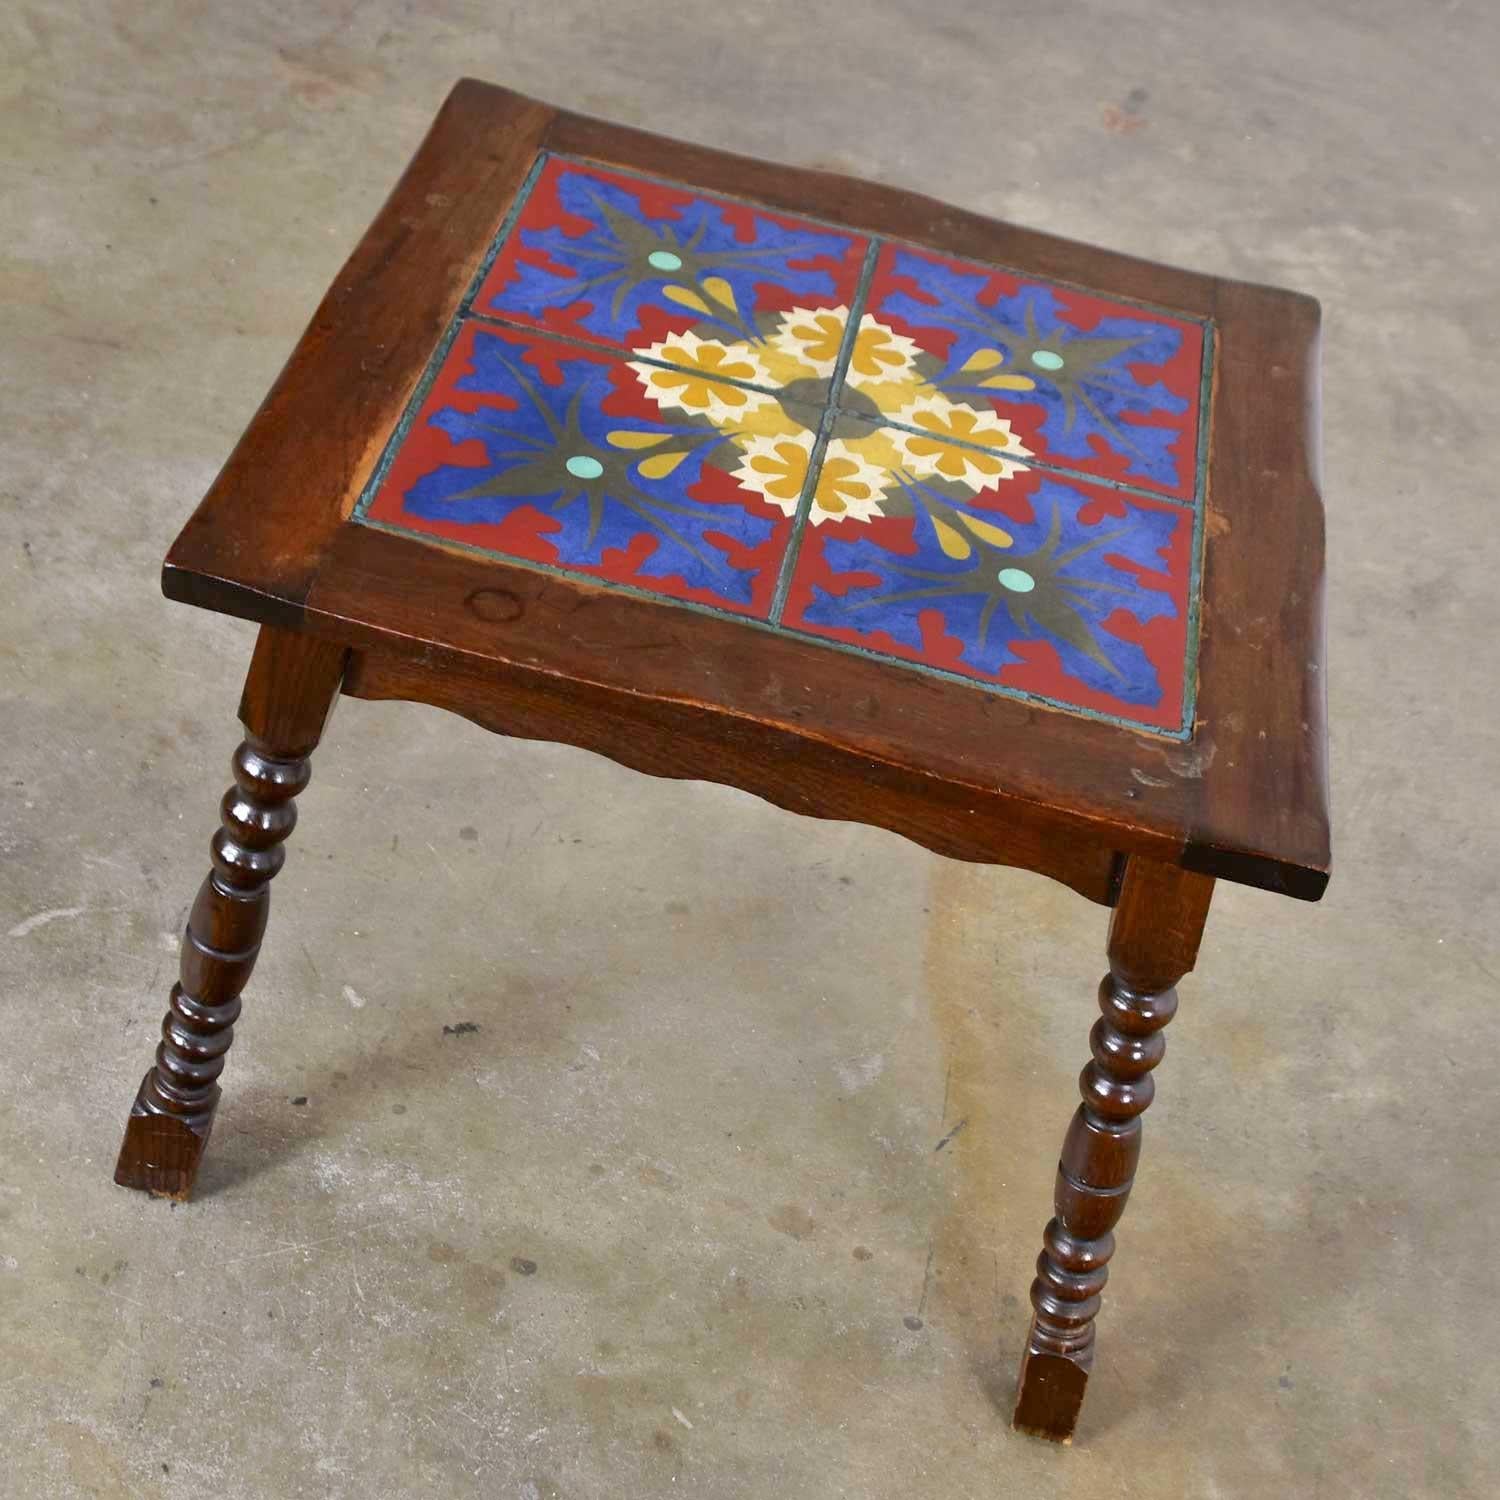 Catalina California or Mission Arts & Crafts Style Spanish Tile Top Side Table In Good Condition For Sale In Topeka, KS